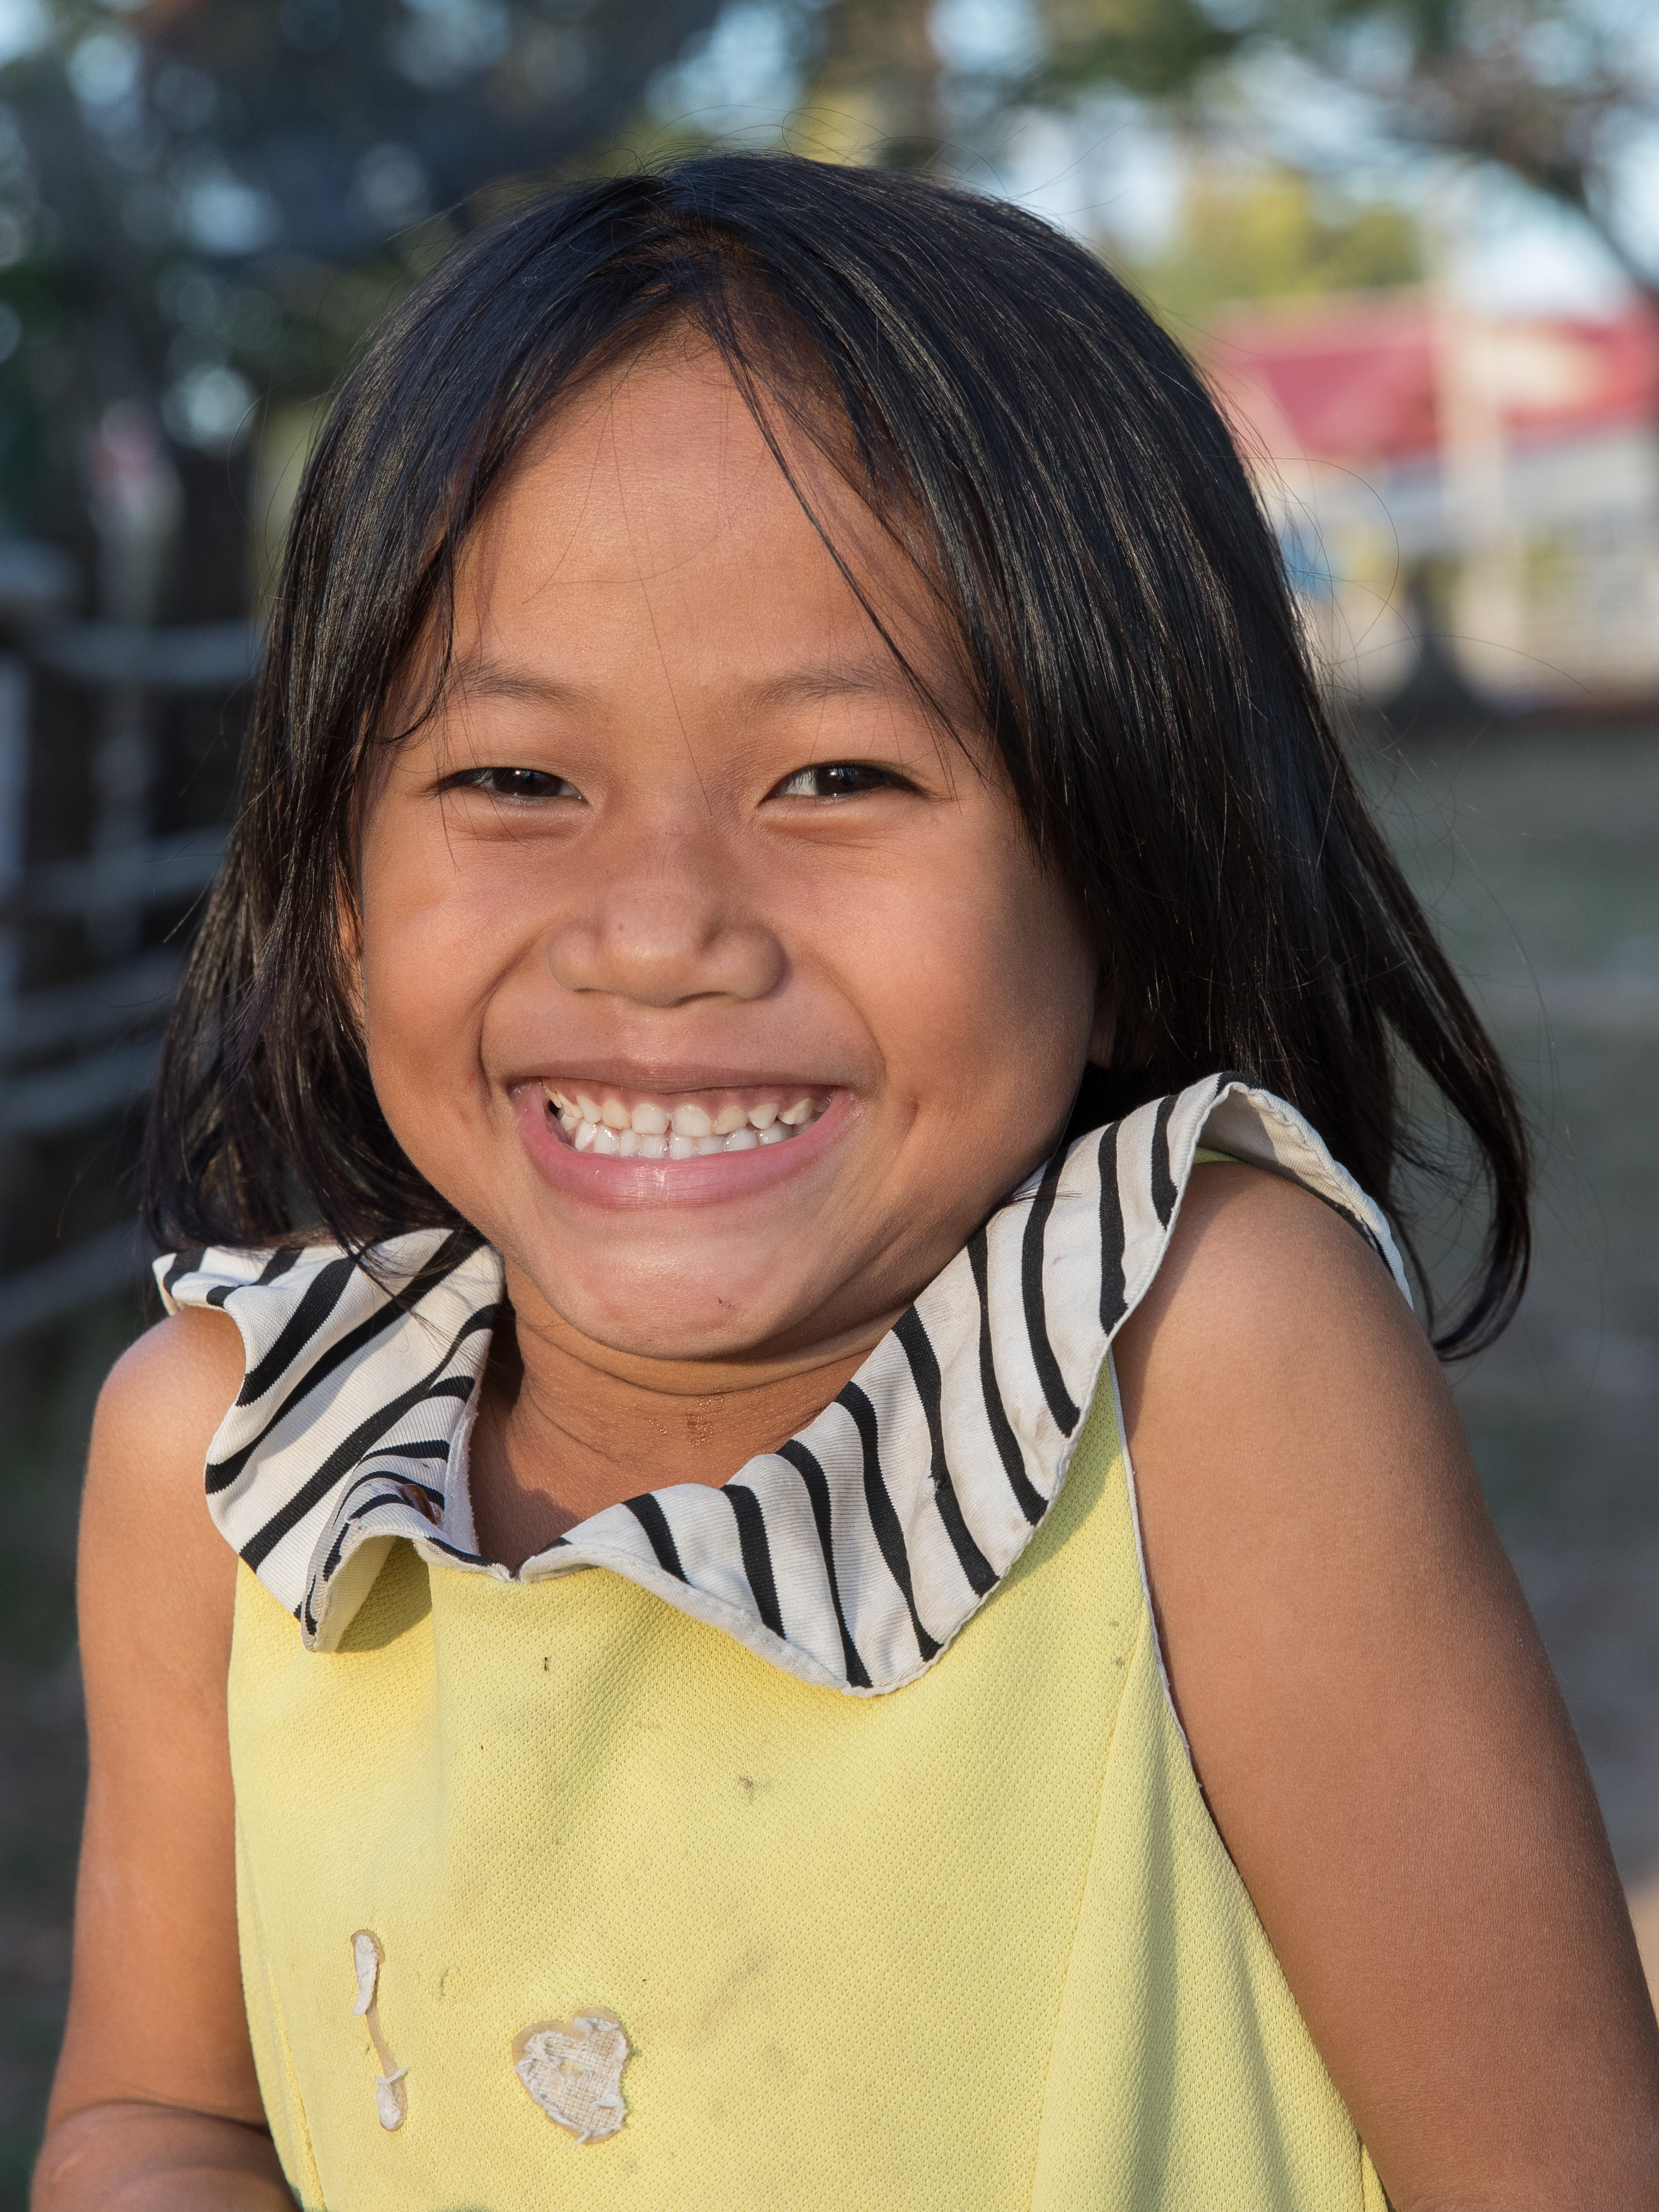 Smiling young girl with yellow shirt